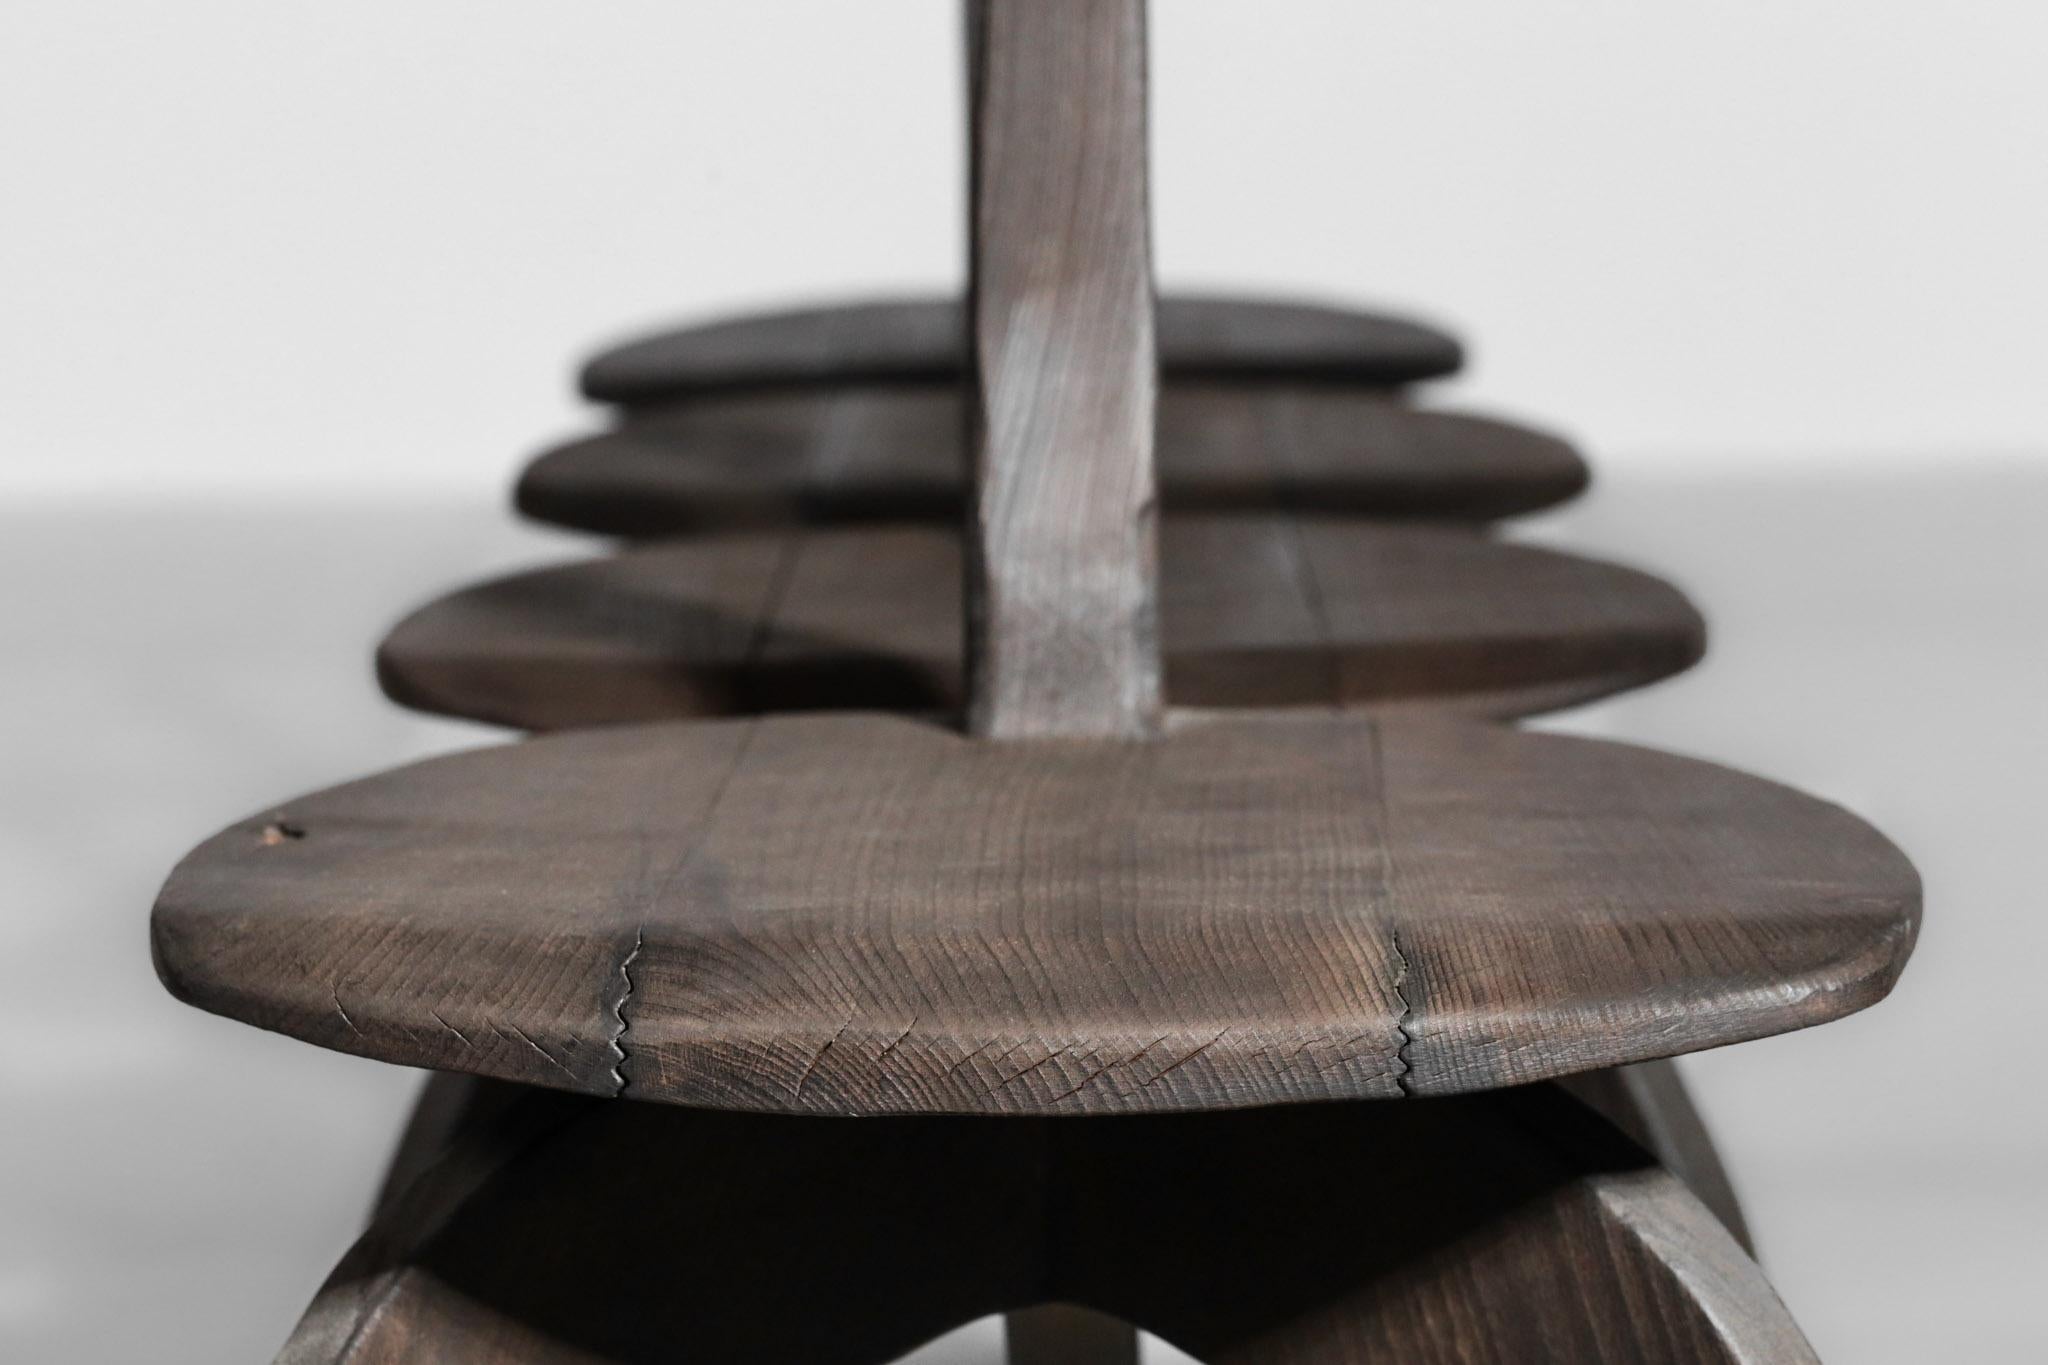 Modern Handcrafted Wooden Chair 80/20 by Vincent Vincent olavi hanninen perriand For Sale 4